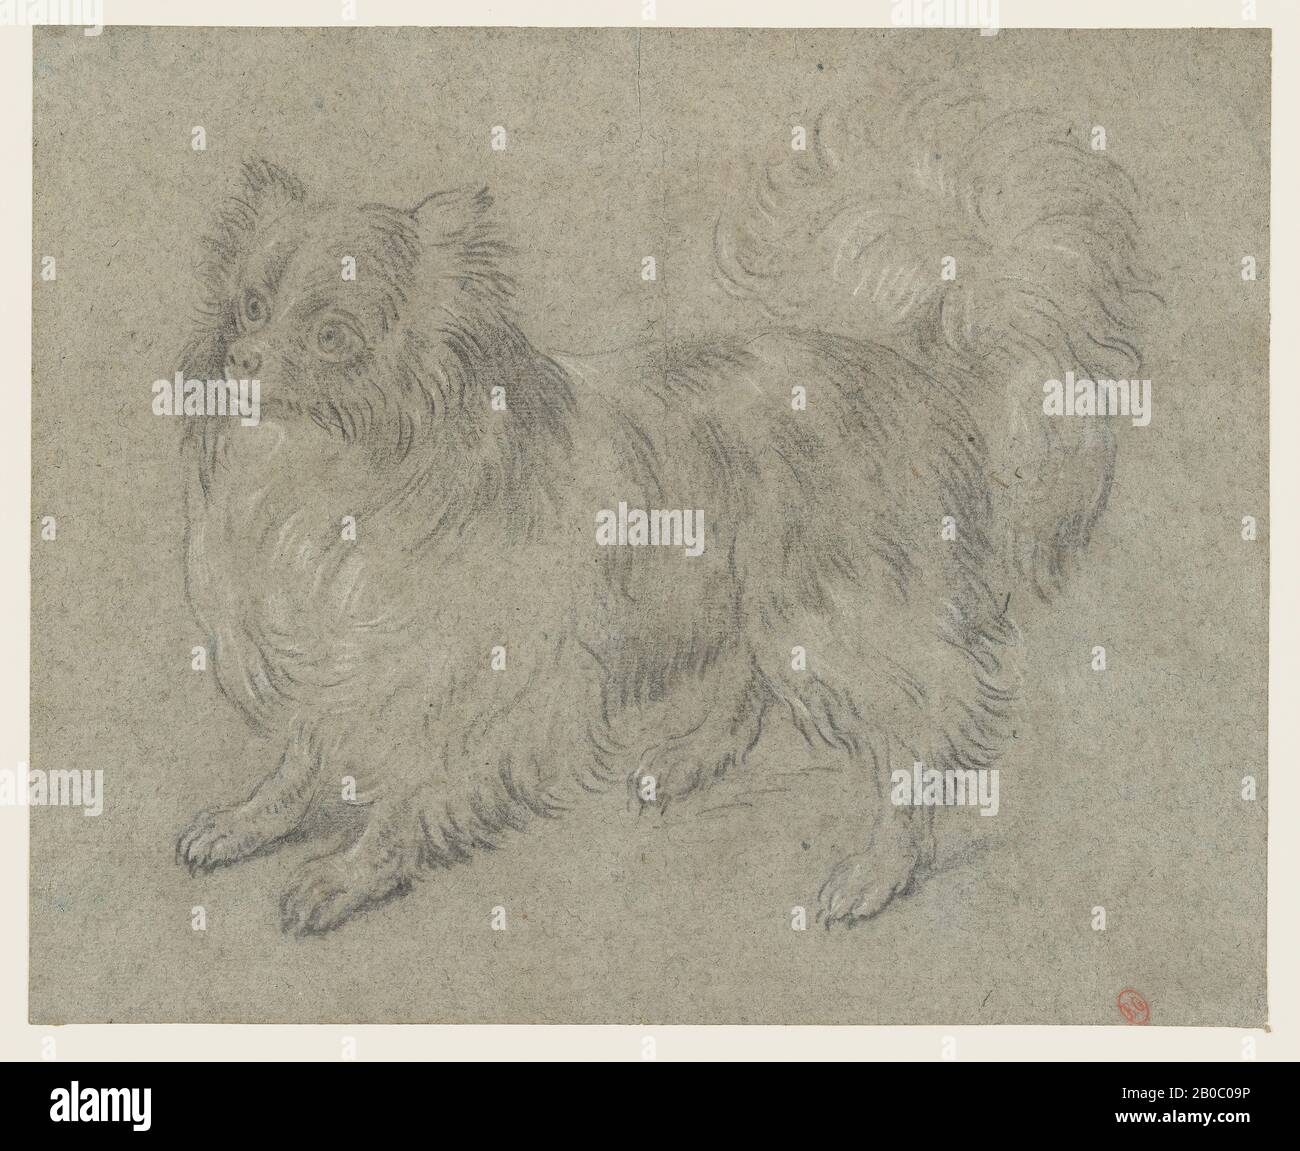 Jean-Baptiste Oudry, A Pomeranian, 1734-1740, black and white chalk on blue paper, 12 1/2 in. x 15 9/16 in. (31.8 cm. x 39.6 cm.), One of the foremost animal and landscape painters in the era of Louis XV of France, Oudry painted royal hunting scenes and portraits of the king's favorite dogs. Royal patronage enabled him to assume several important administrative and teaching positions. Oudry was an active draftsman, who prepared on paper his work in painting, tapestry design, and engraving. This loosely drawn study of a dog is typical of Oudry's use of black and white chalk on colored paper. It Stock Photo